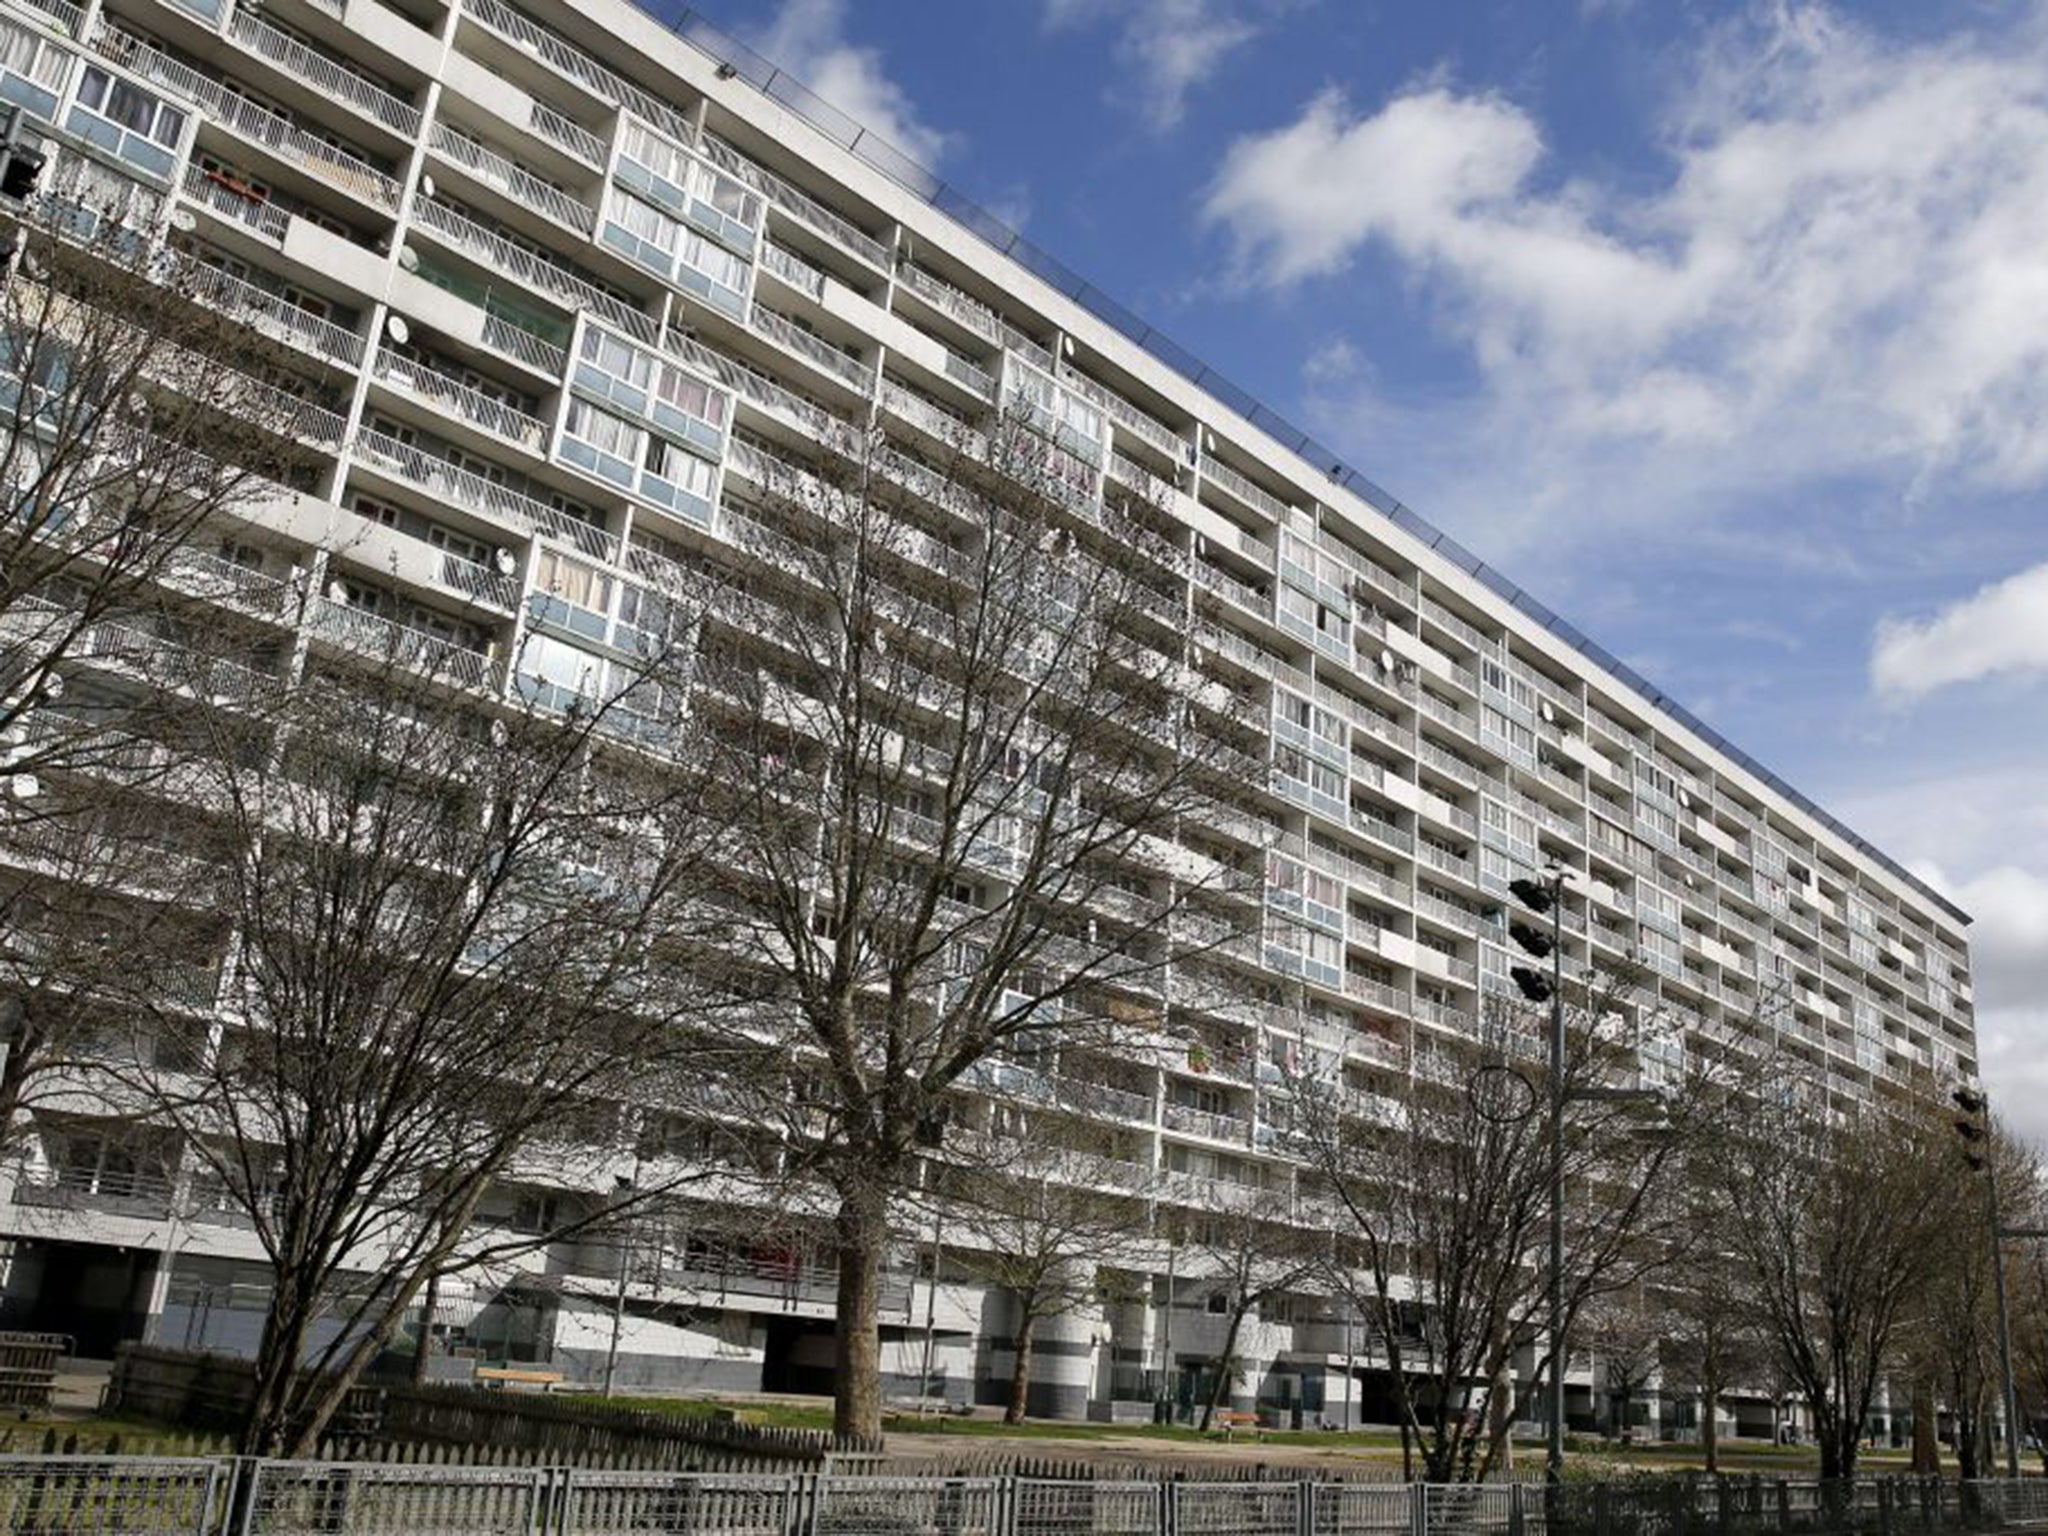 La Courneuve is one of the most deprived areas of Paris